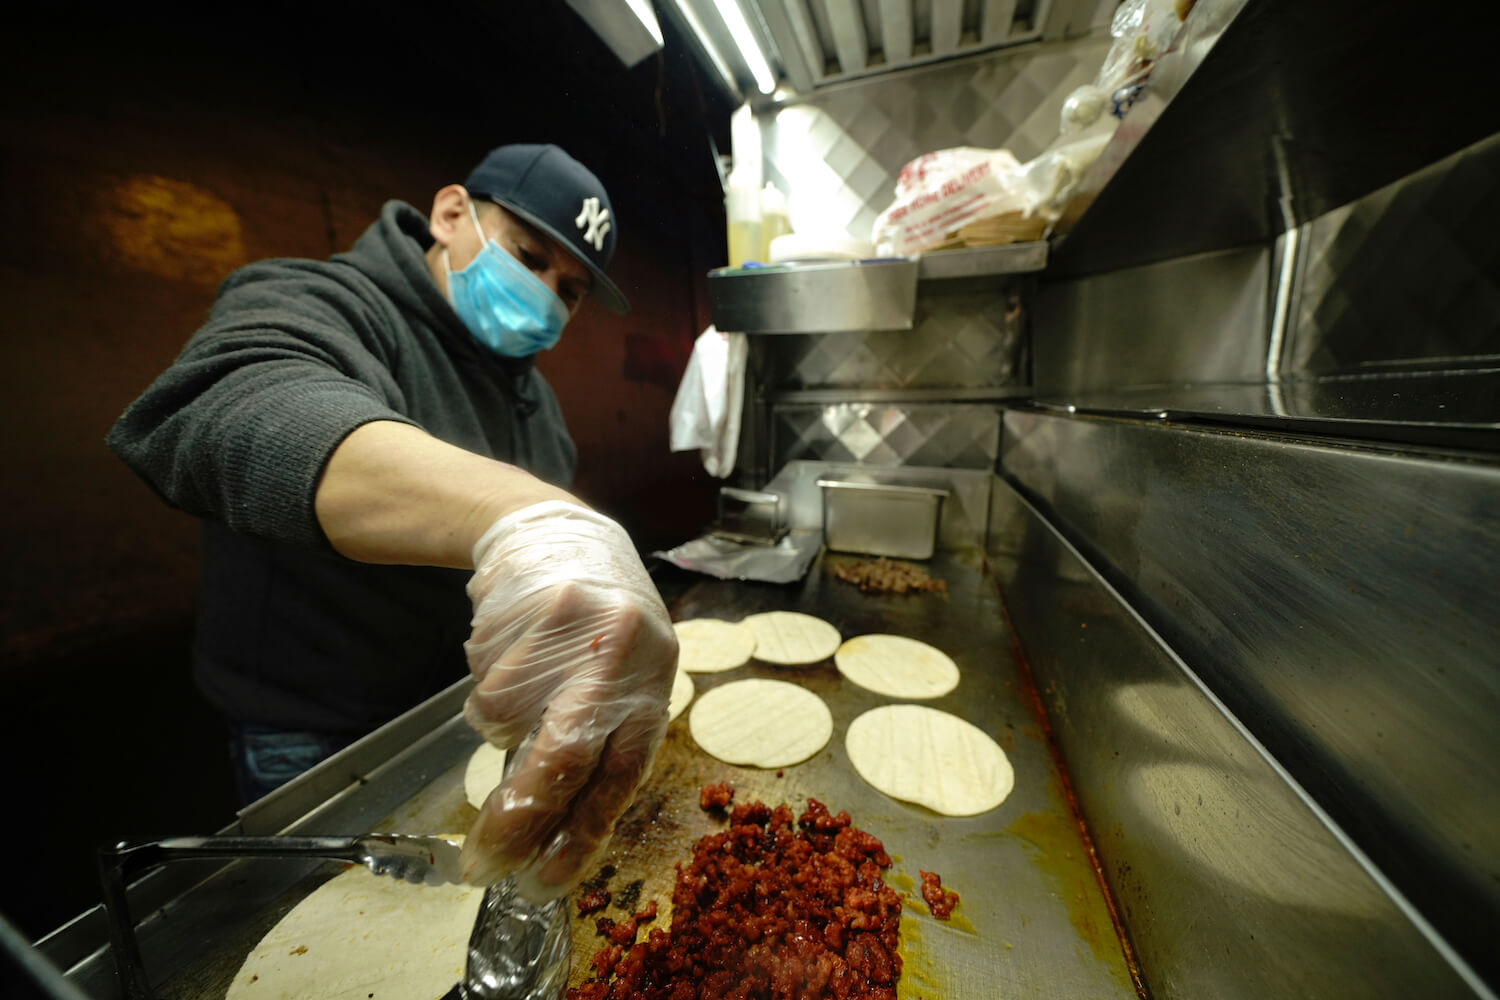 A taco vendor during the coronavirus pandemic on May 18, 2020 in the borough of Queens in New York City. (June 2020)